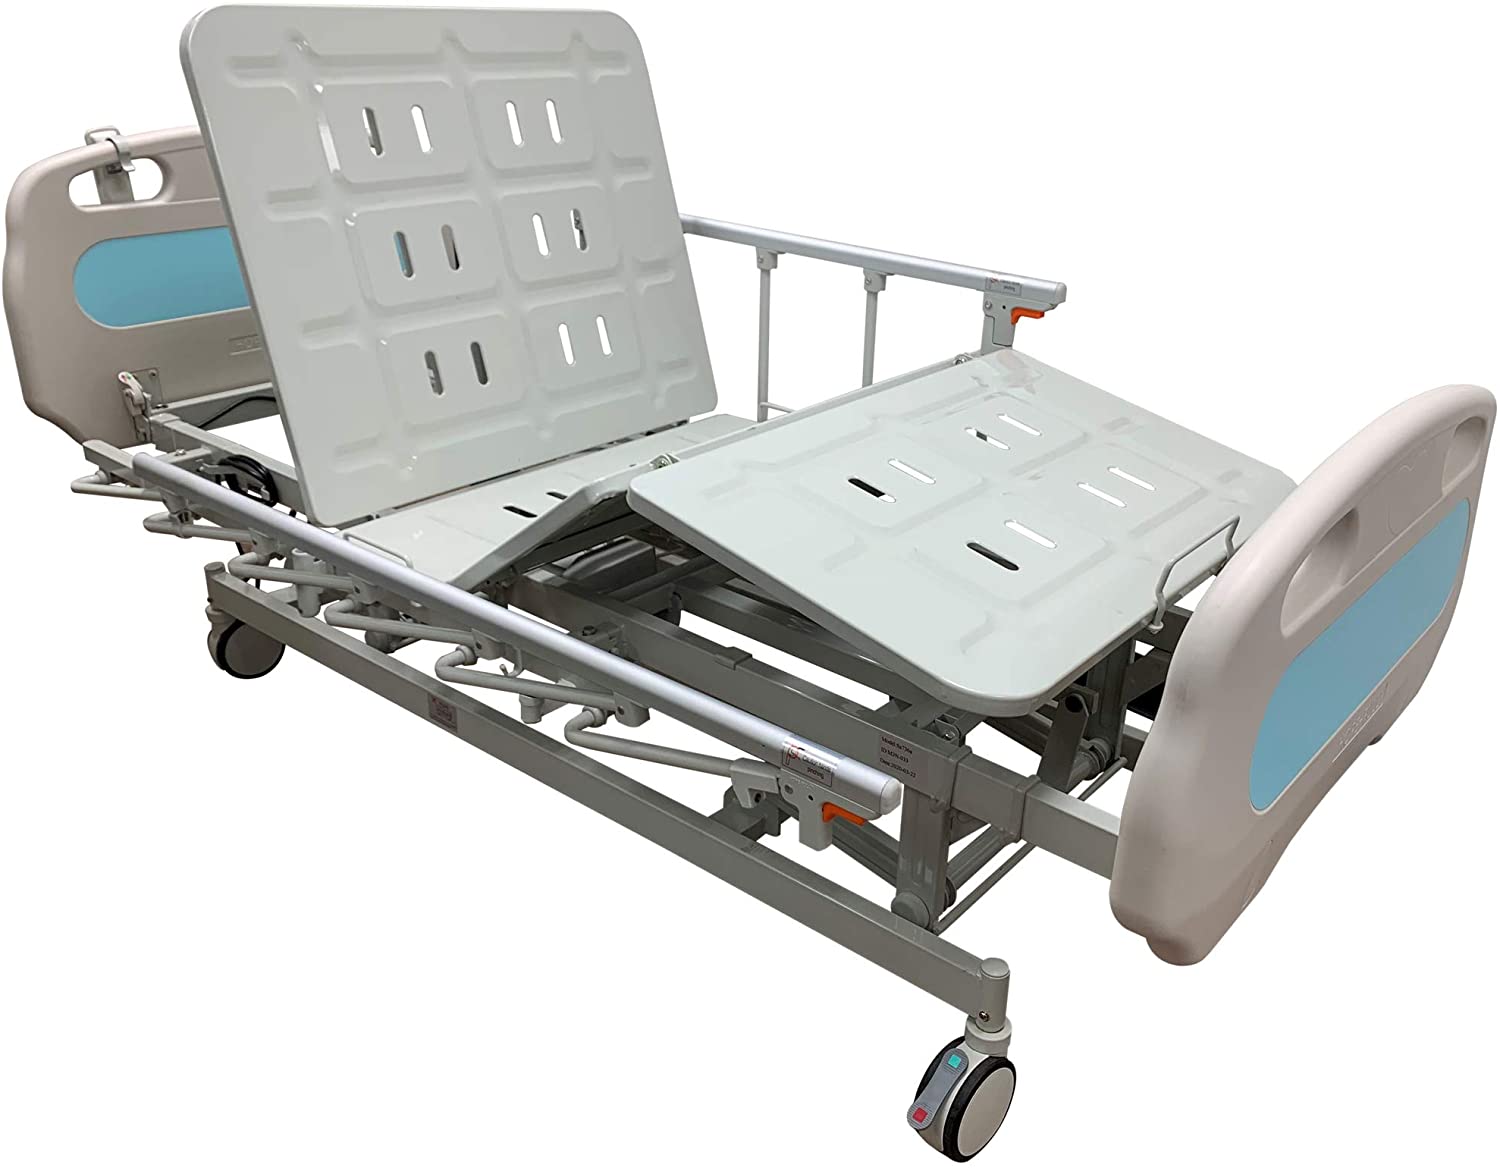 Buy Adjustable Hospital Bed, Therapeutic Beds